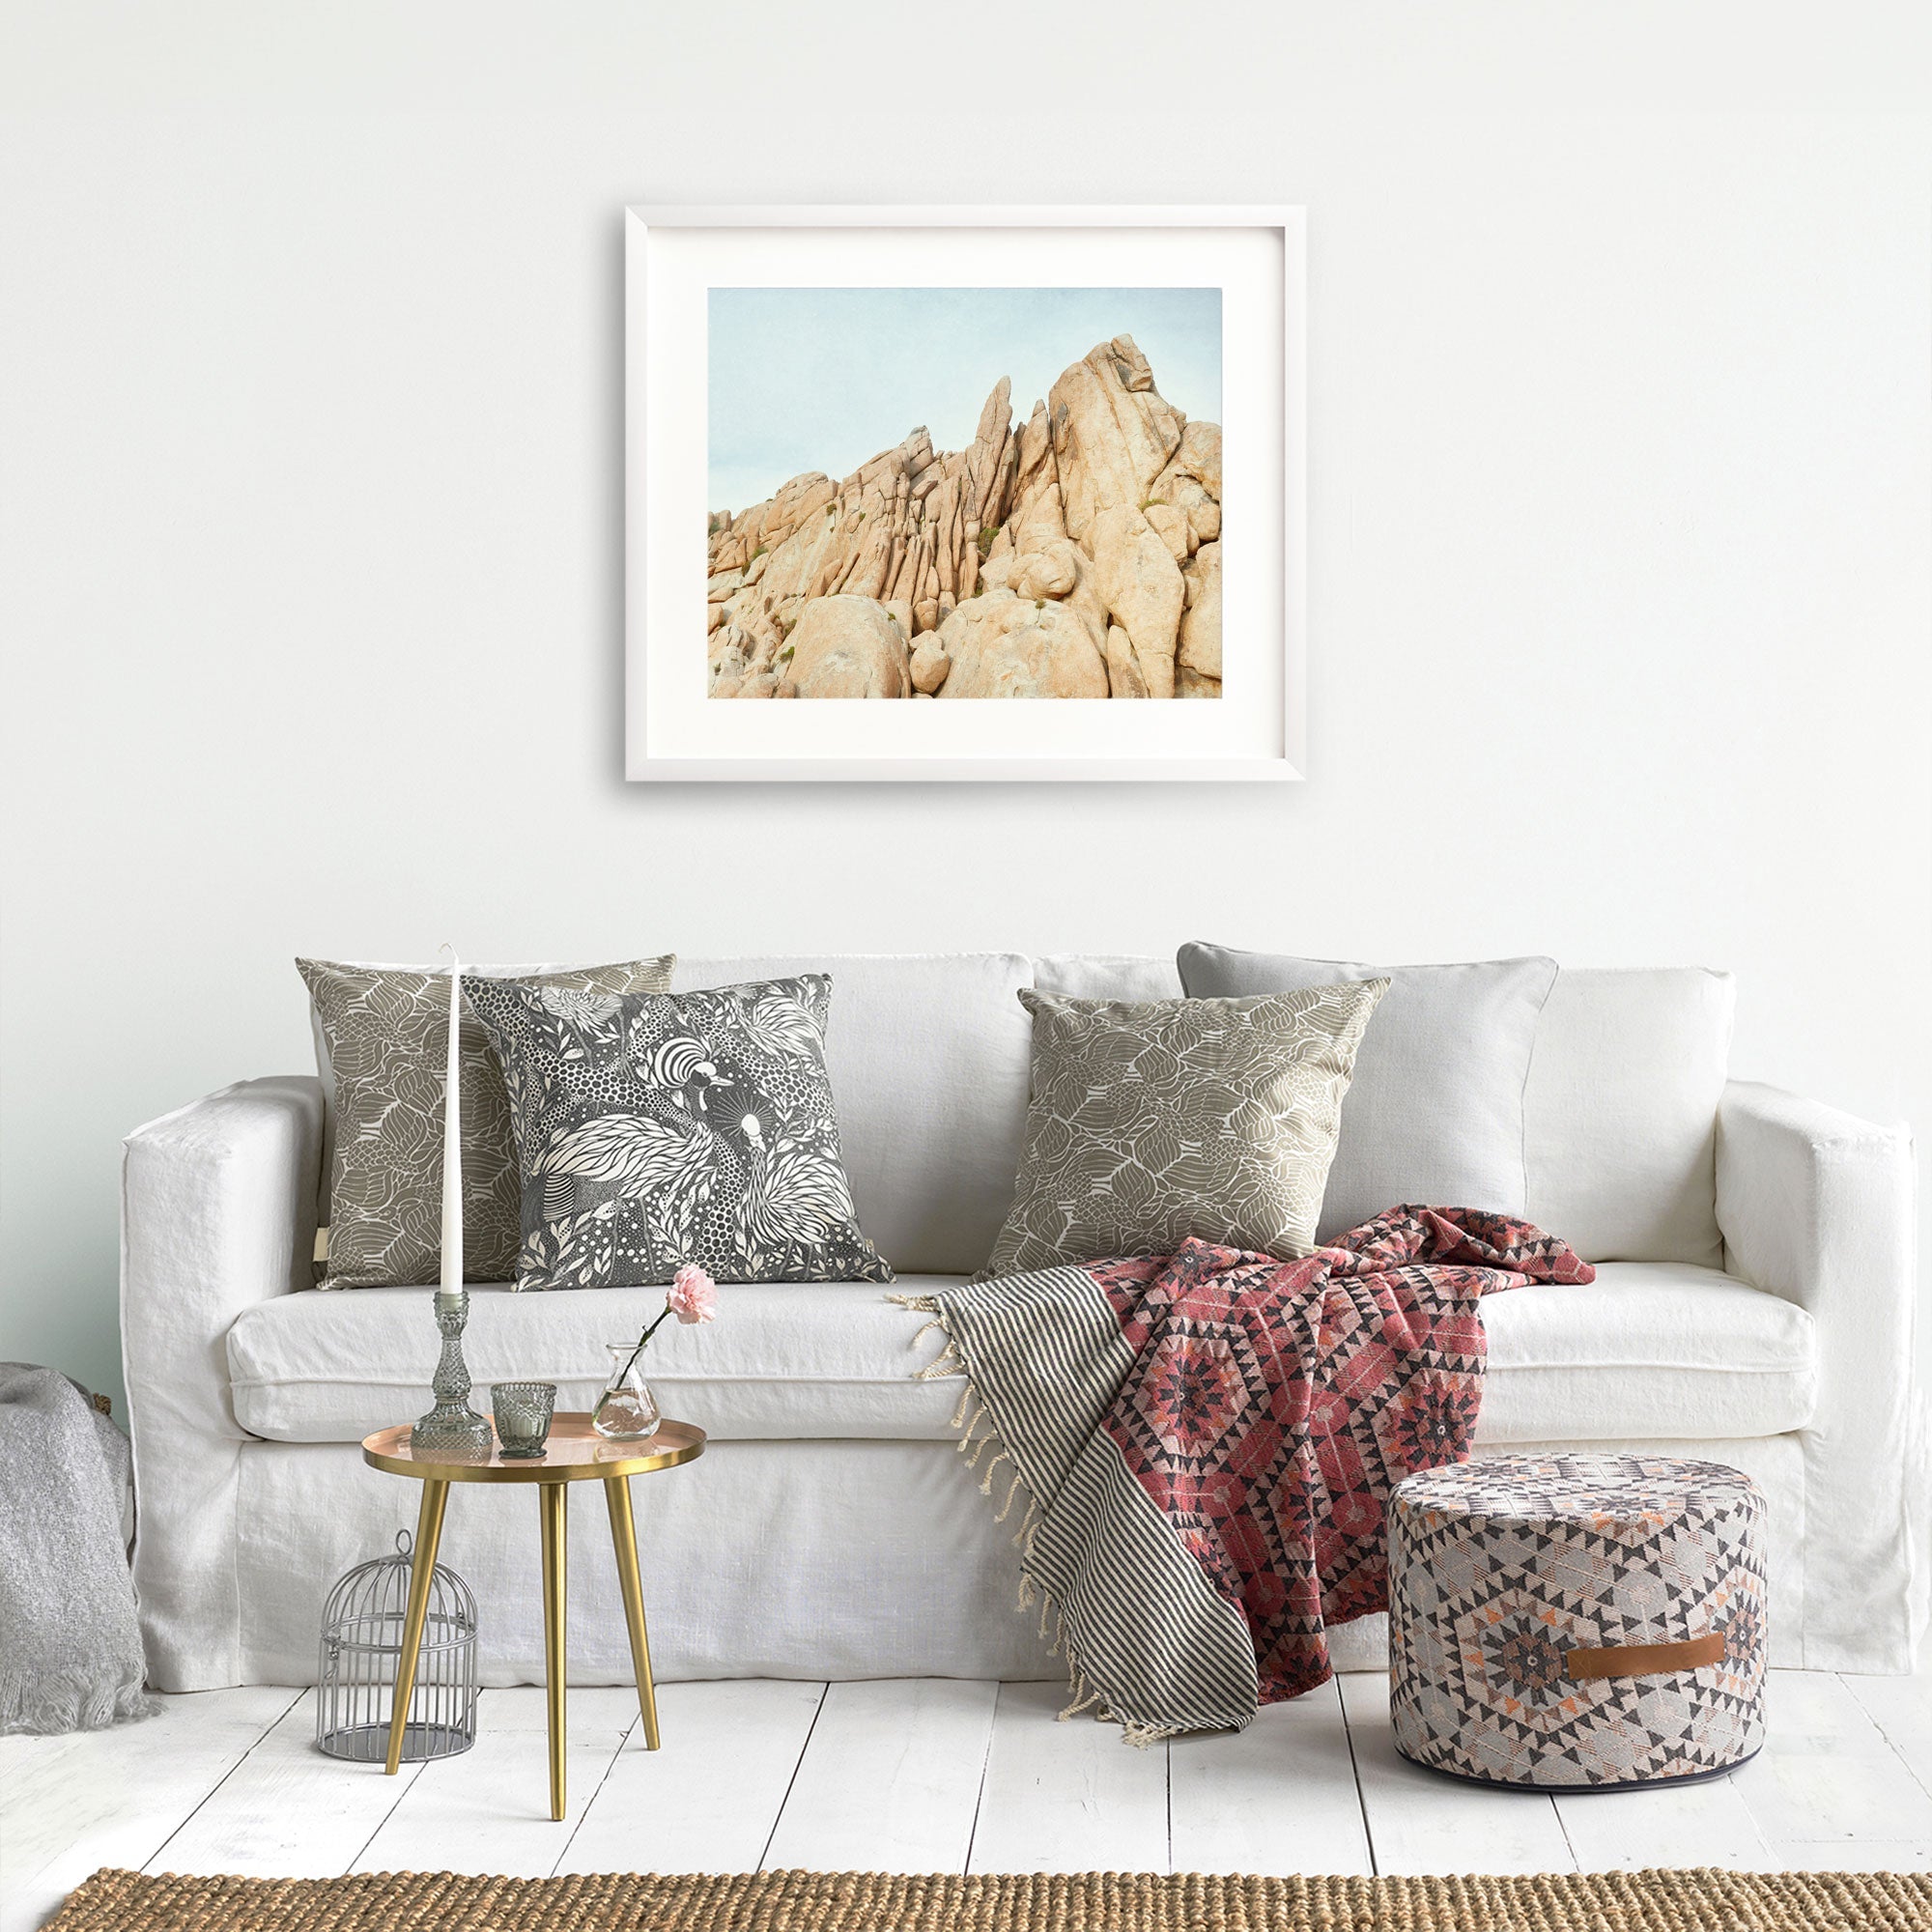 A cozy living room featuring a white sofa adorned with decorative gray pillows, a red patterned throw blanket, a small round table with a plant, a birdcage, and unframed prints of Offley Green's Joshua Tree Print, 'Joshua Rocks'.